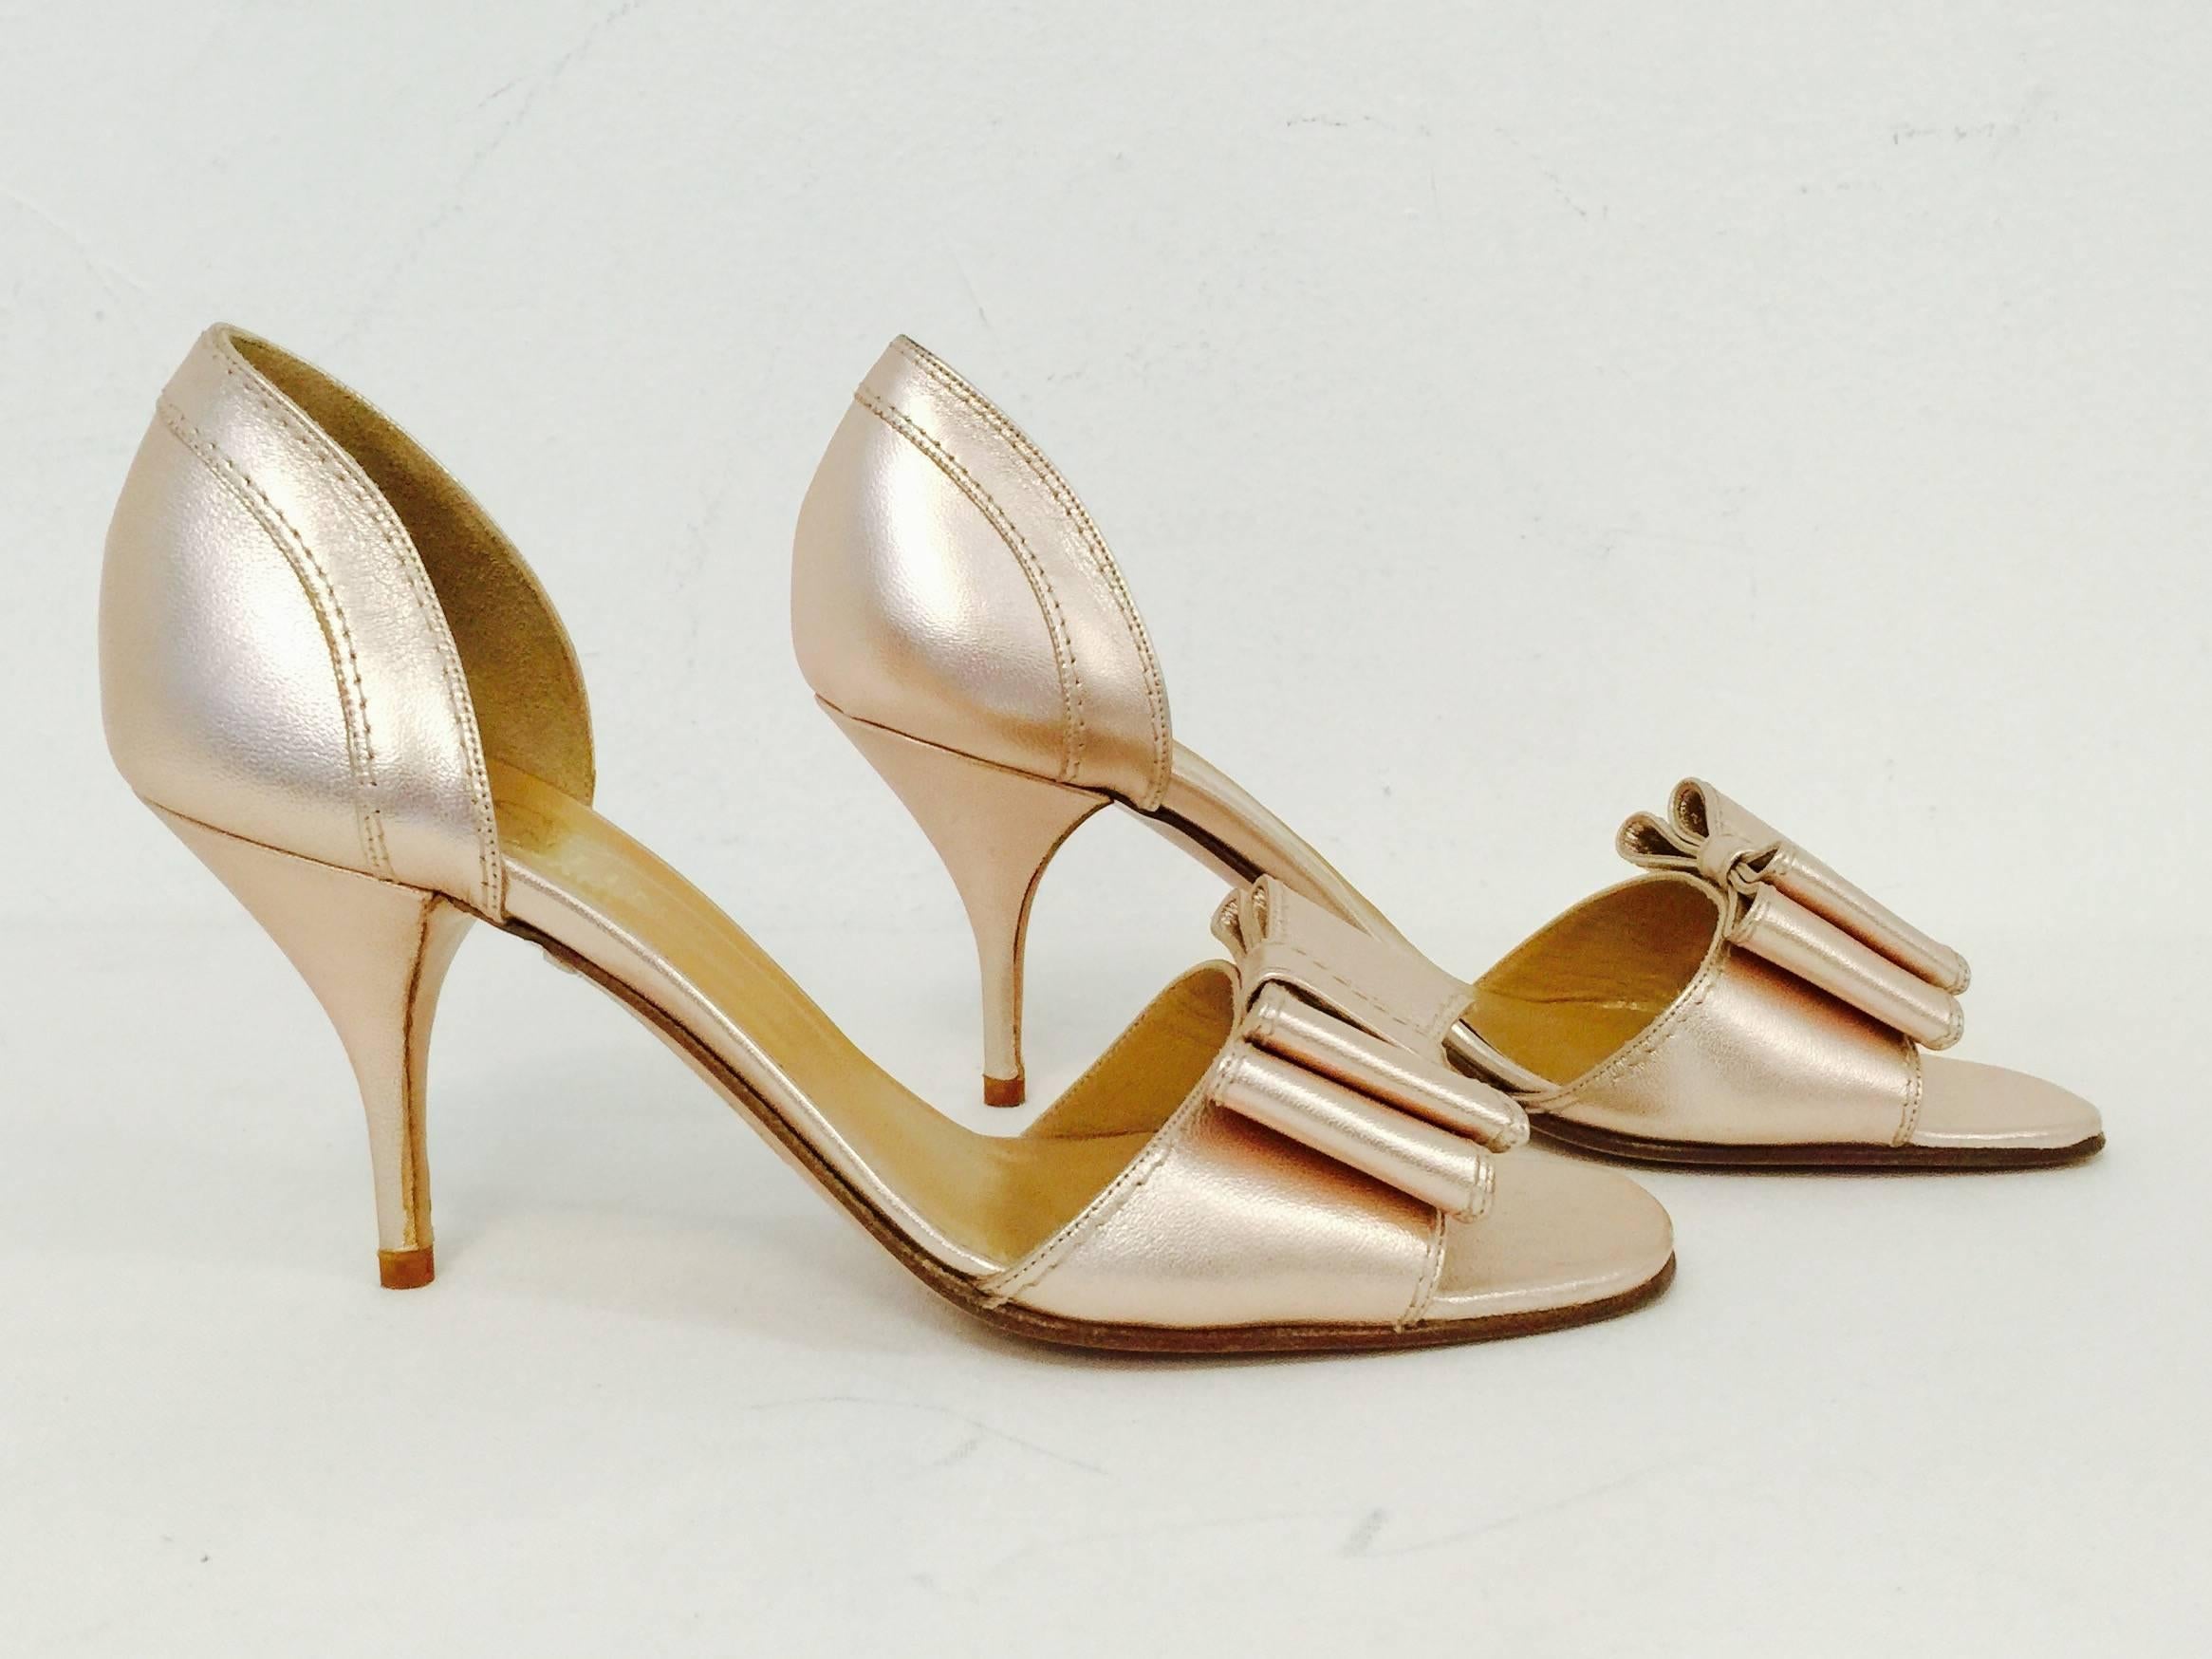 Valentino Garavani High Heels are pure Valentino...feminine, flirty, and fabulous!  Crafted from supple rose gold metallic leather, sandals feature leather soles and insoles with suede lined counters.  Finished with Valentino's signature bow on the